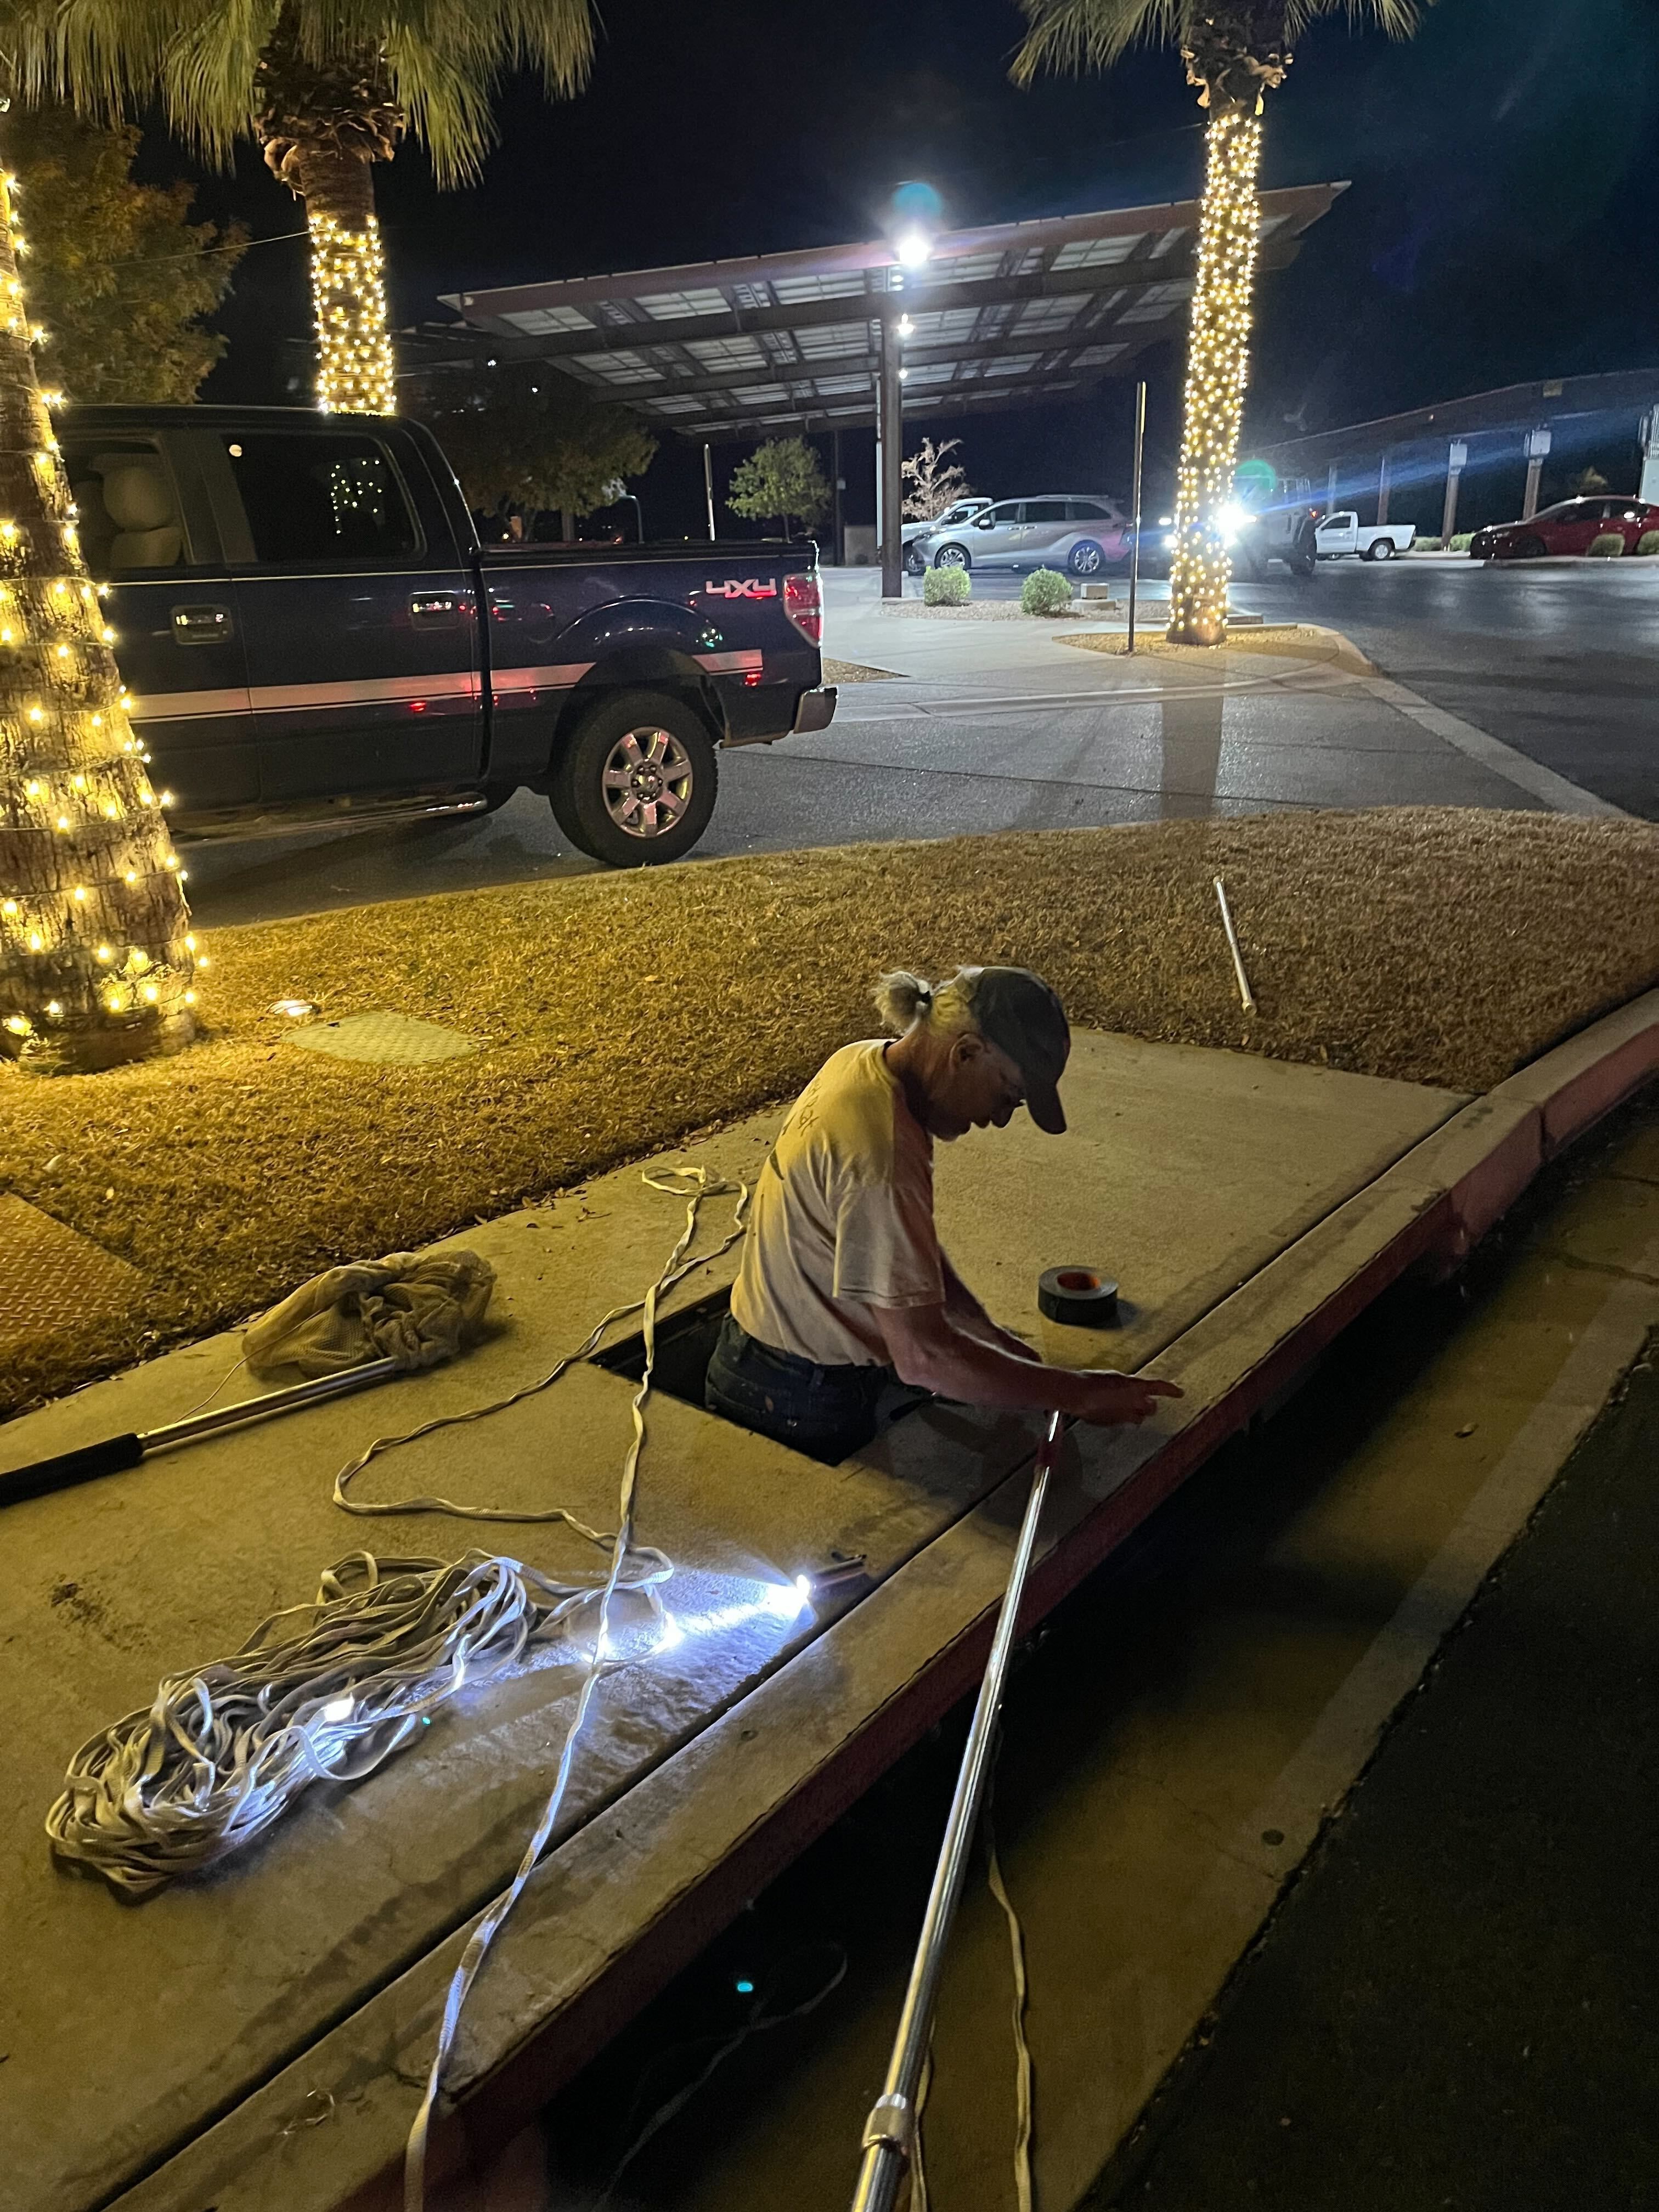 Rescuer Paul is half-in, half-out of a vertical storm drain entrance at night. He's lit by twinkling holiday decorations in the background. He is deep in thought, brainstorming how to save the raccoon's life.